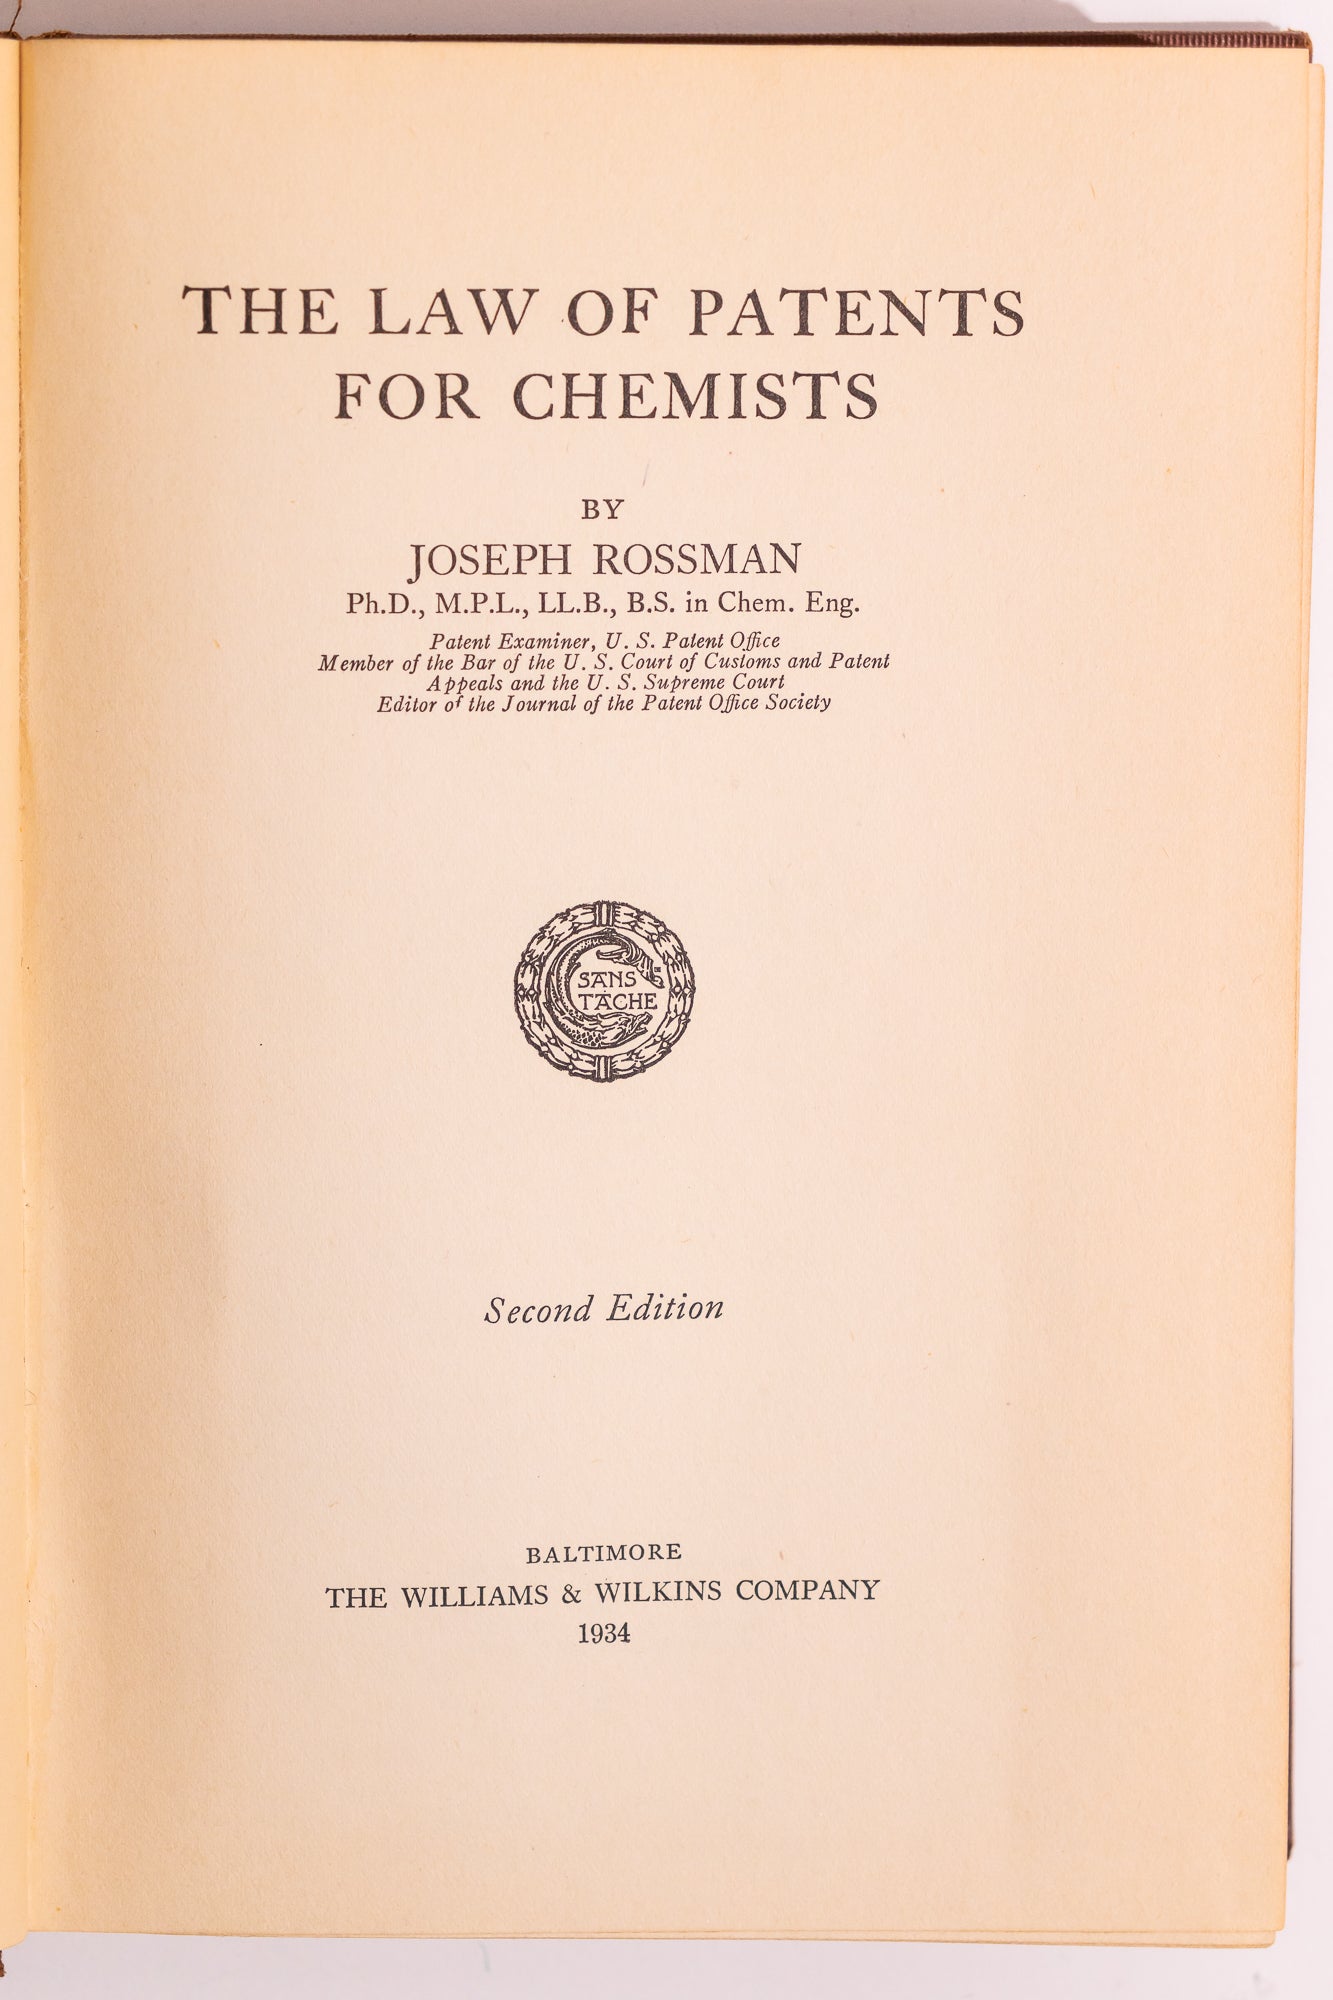 The Law of Patents for Chemists